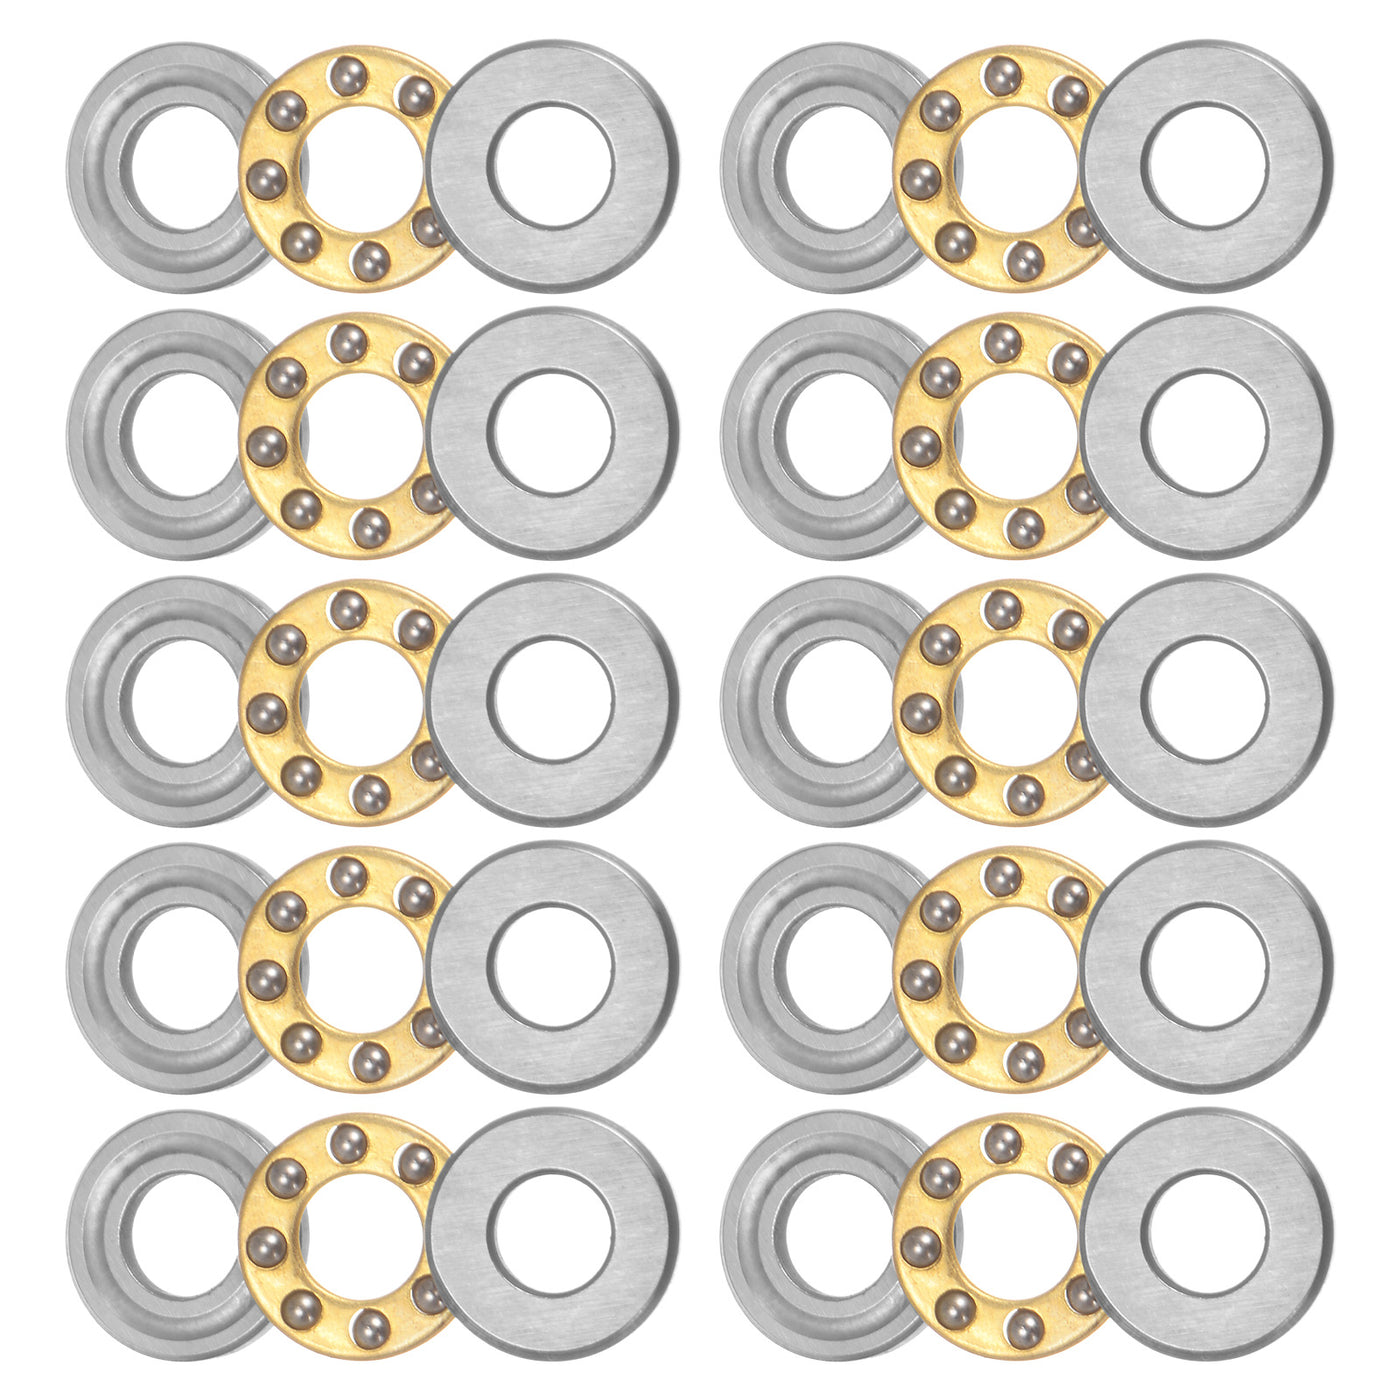 uxcell Uxcell F4-9M Thrust Ball Bearing 4x9x4mm Brass with Washers 10pcs